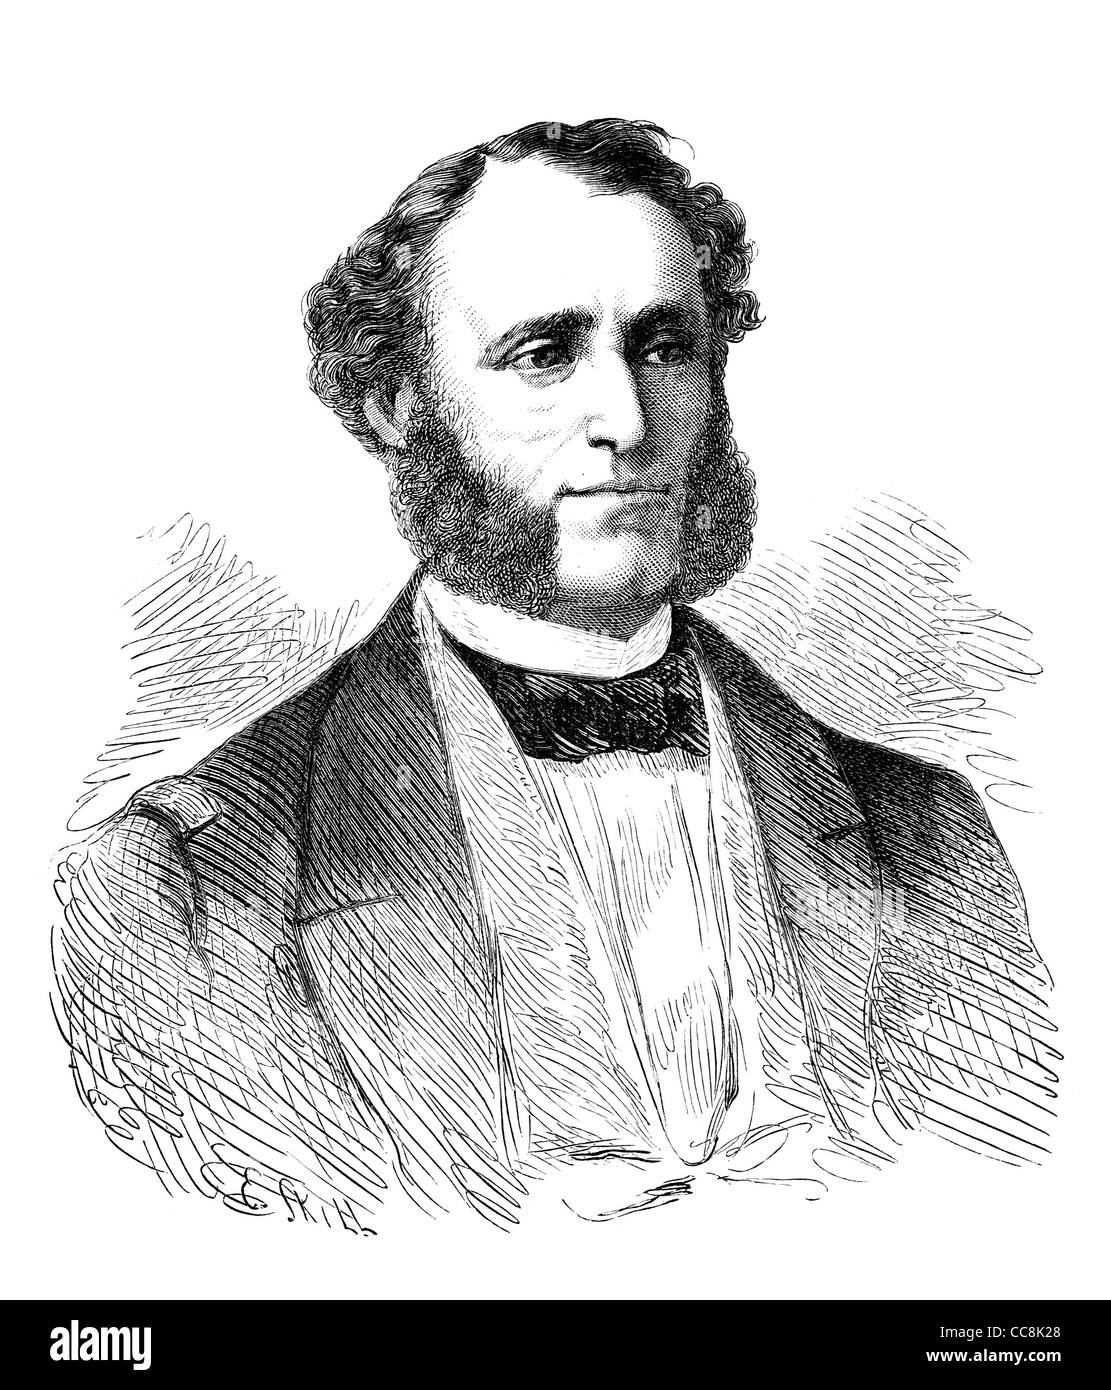 Erik Magnus af Klint (1813-1877), swedish military person and politician. Old engraving from a magazine printed in 1866. Stock Photo